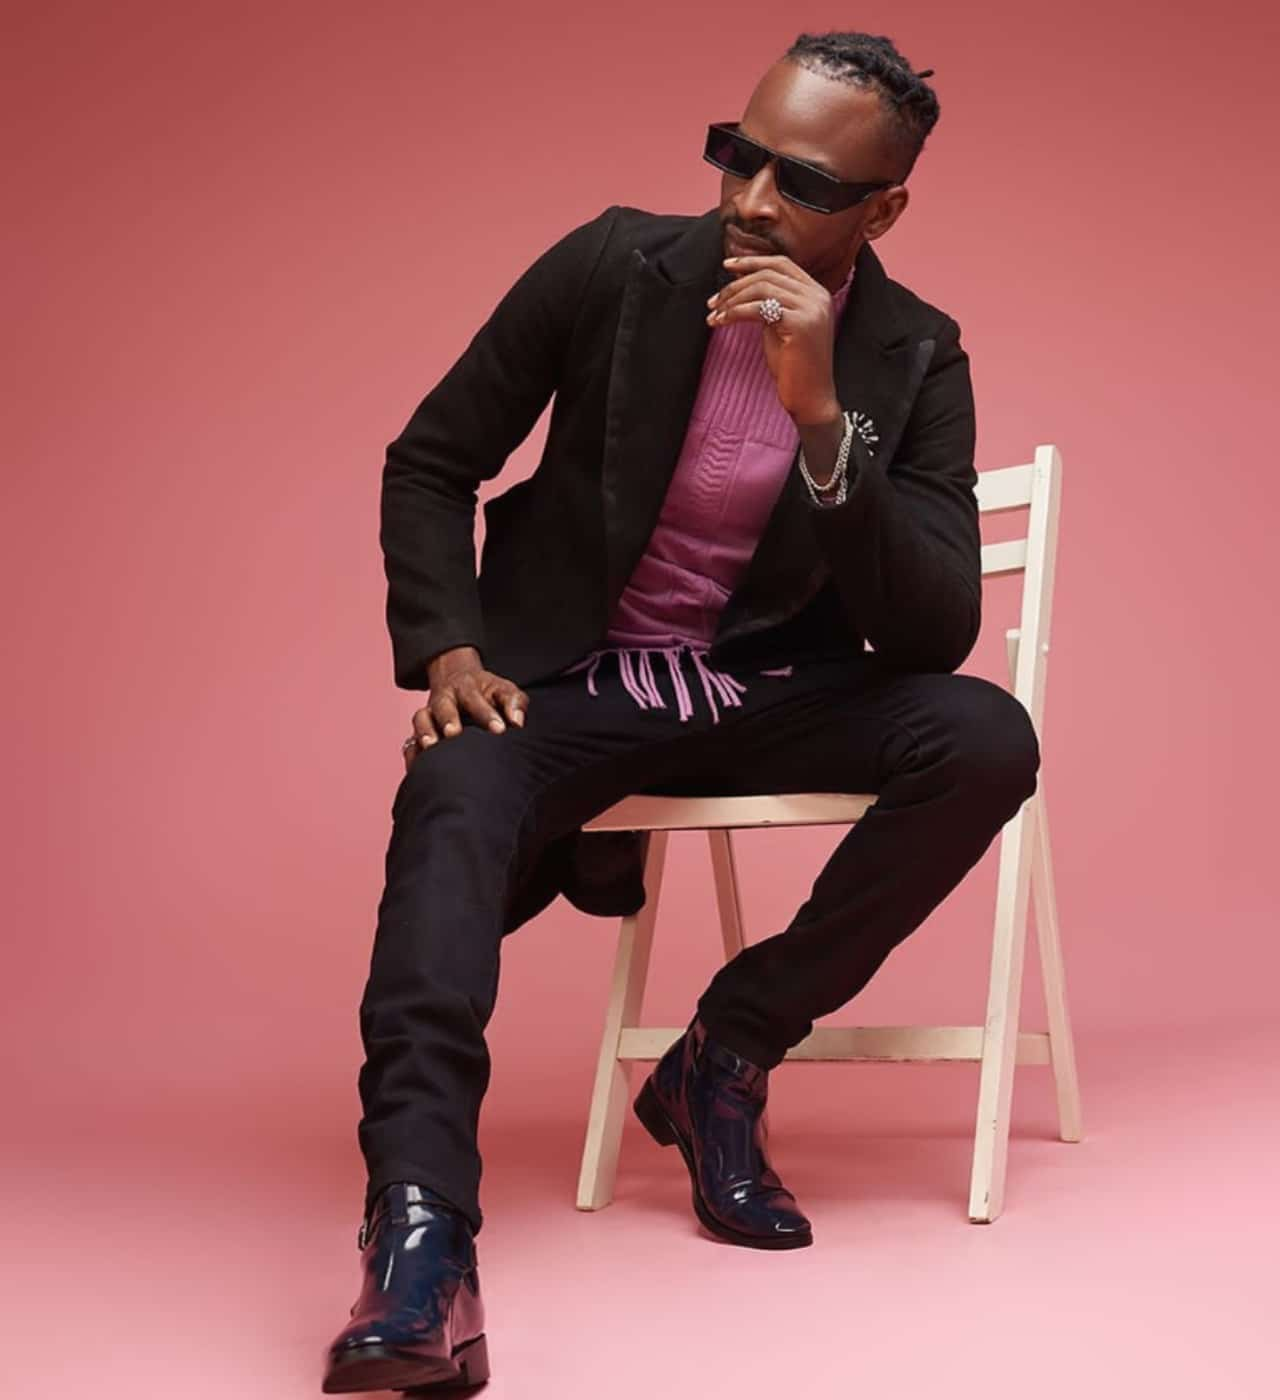 Boom Convo | 9ice Gets Into His Forthcoming Project, US Tour and More…